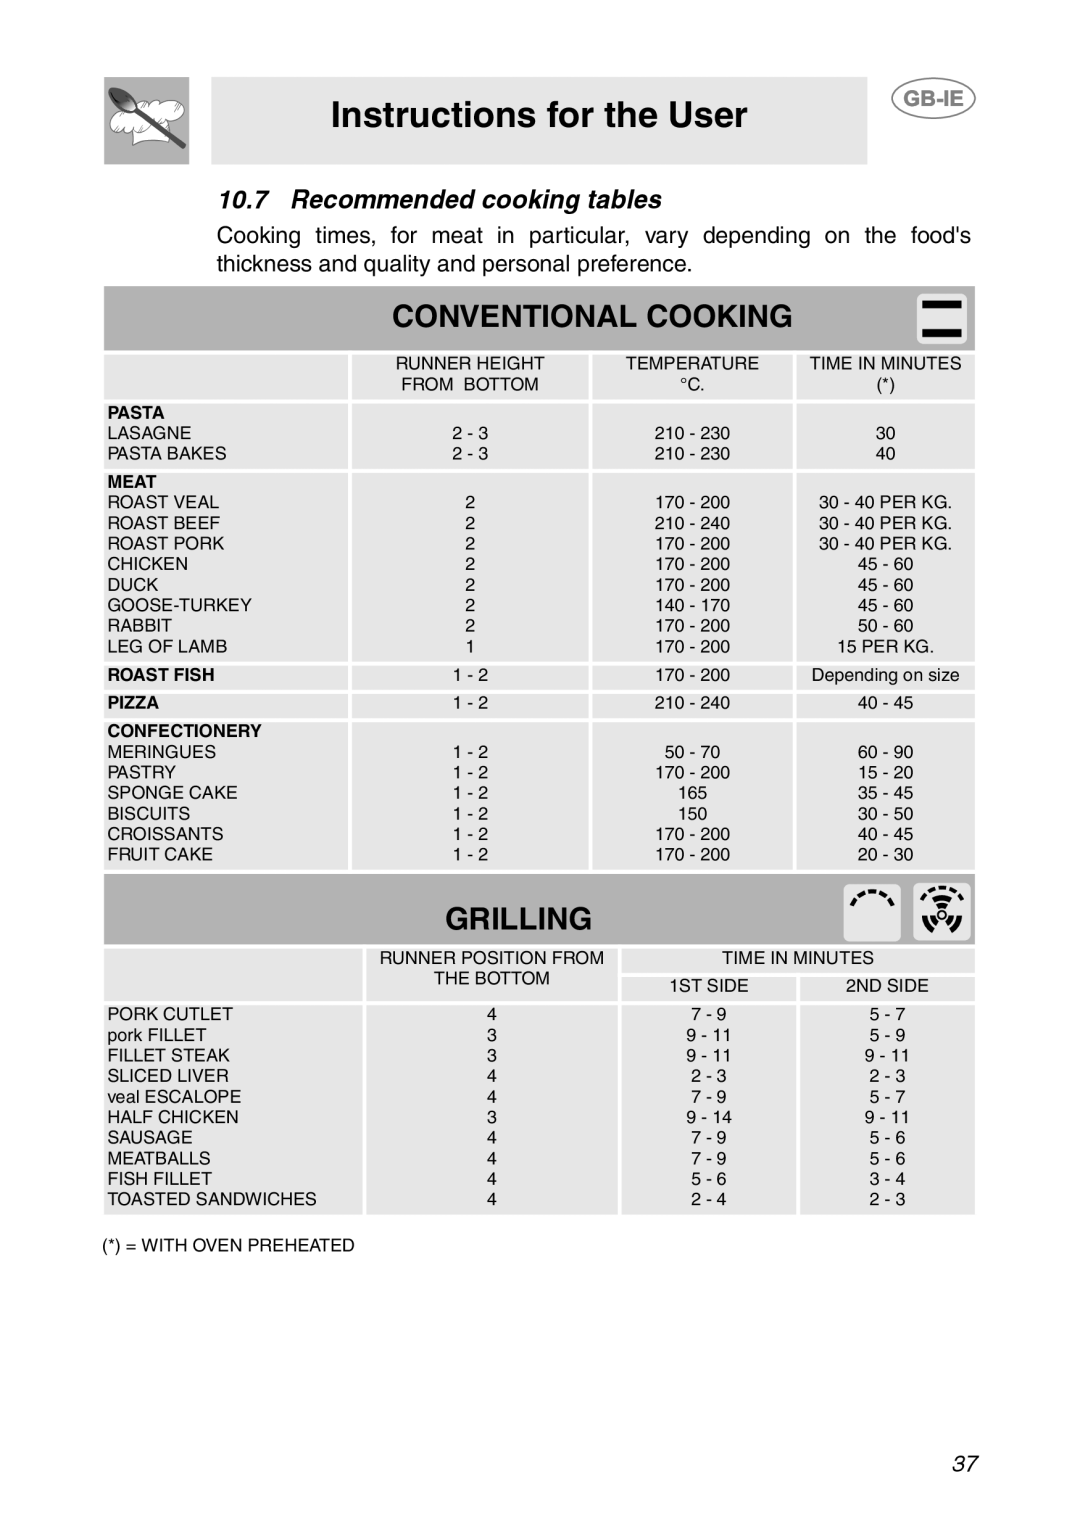 Smeg CS150SA manual Conventional Cooking, Grilling, Instructions for the User, Recommended cooking tables 